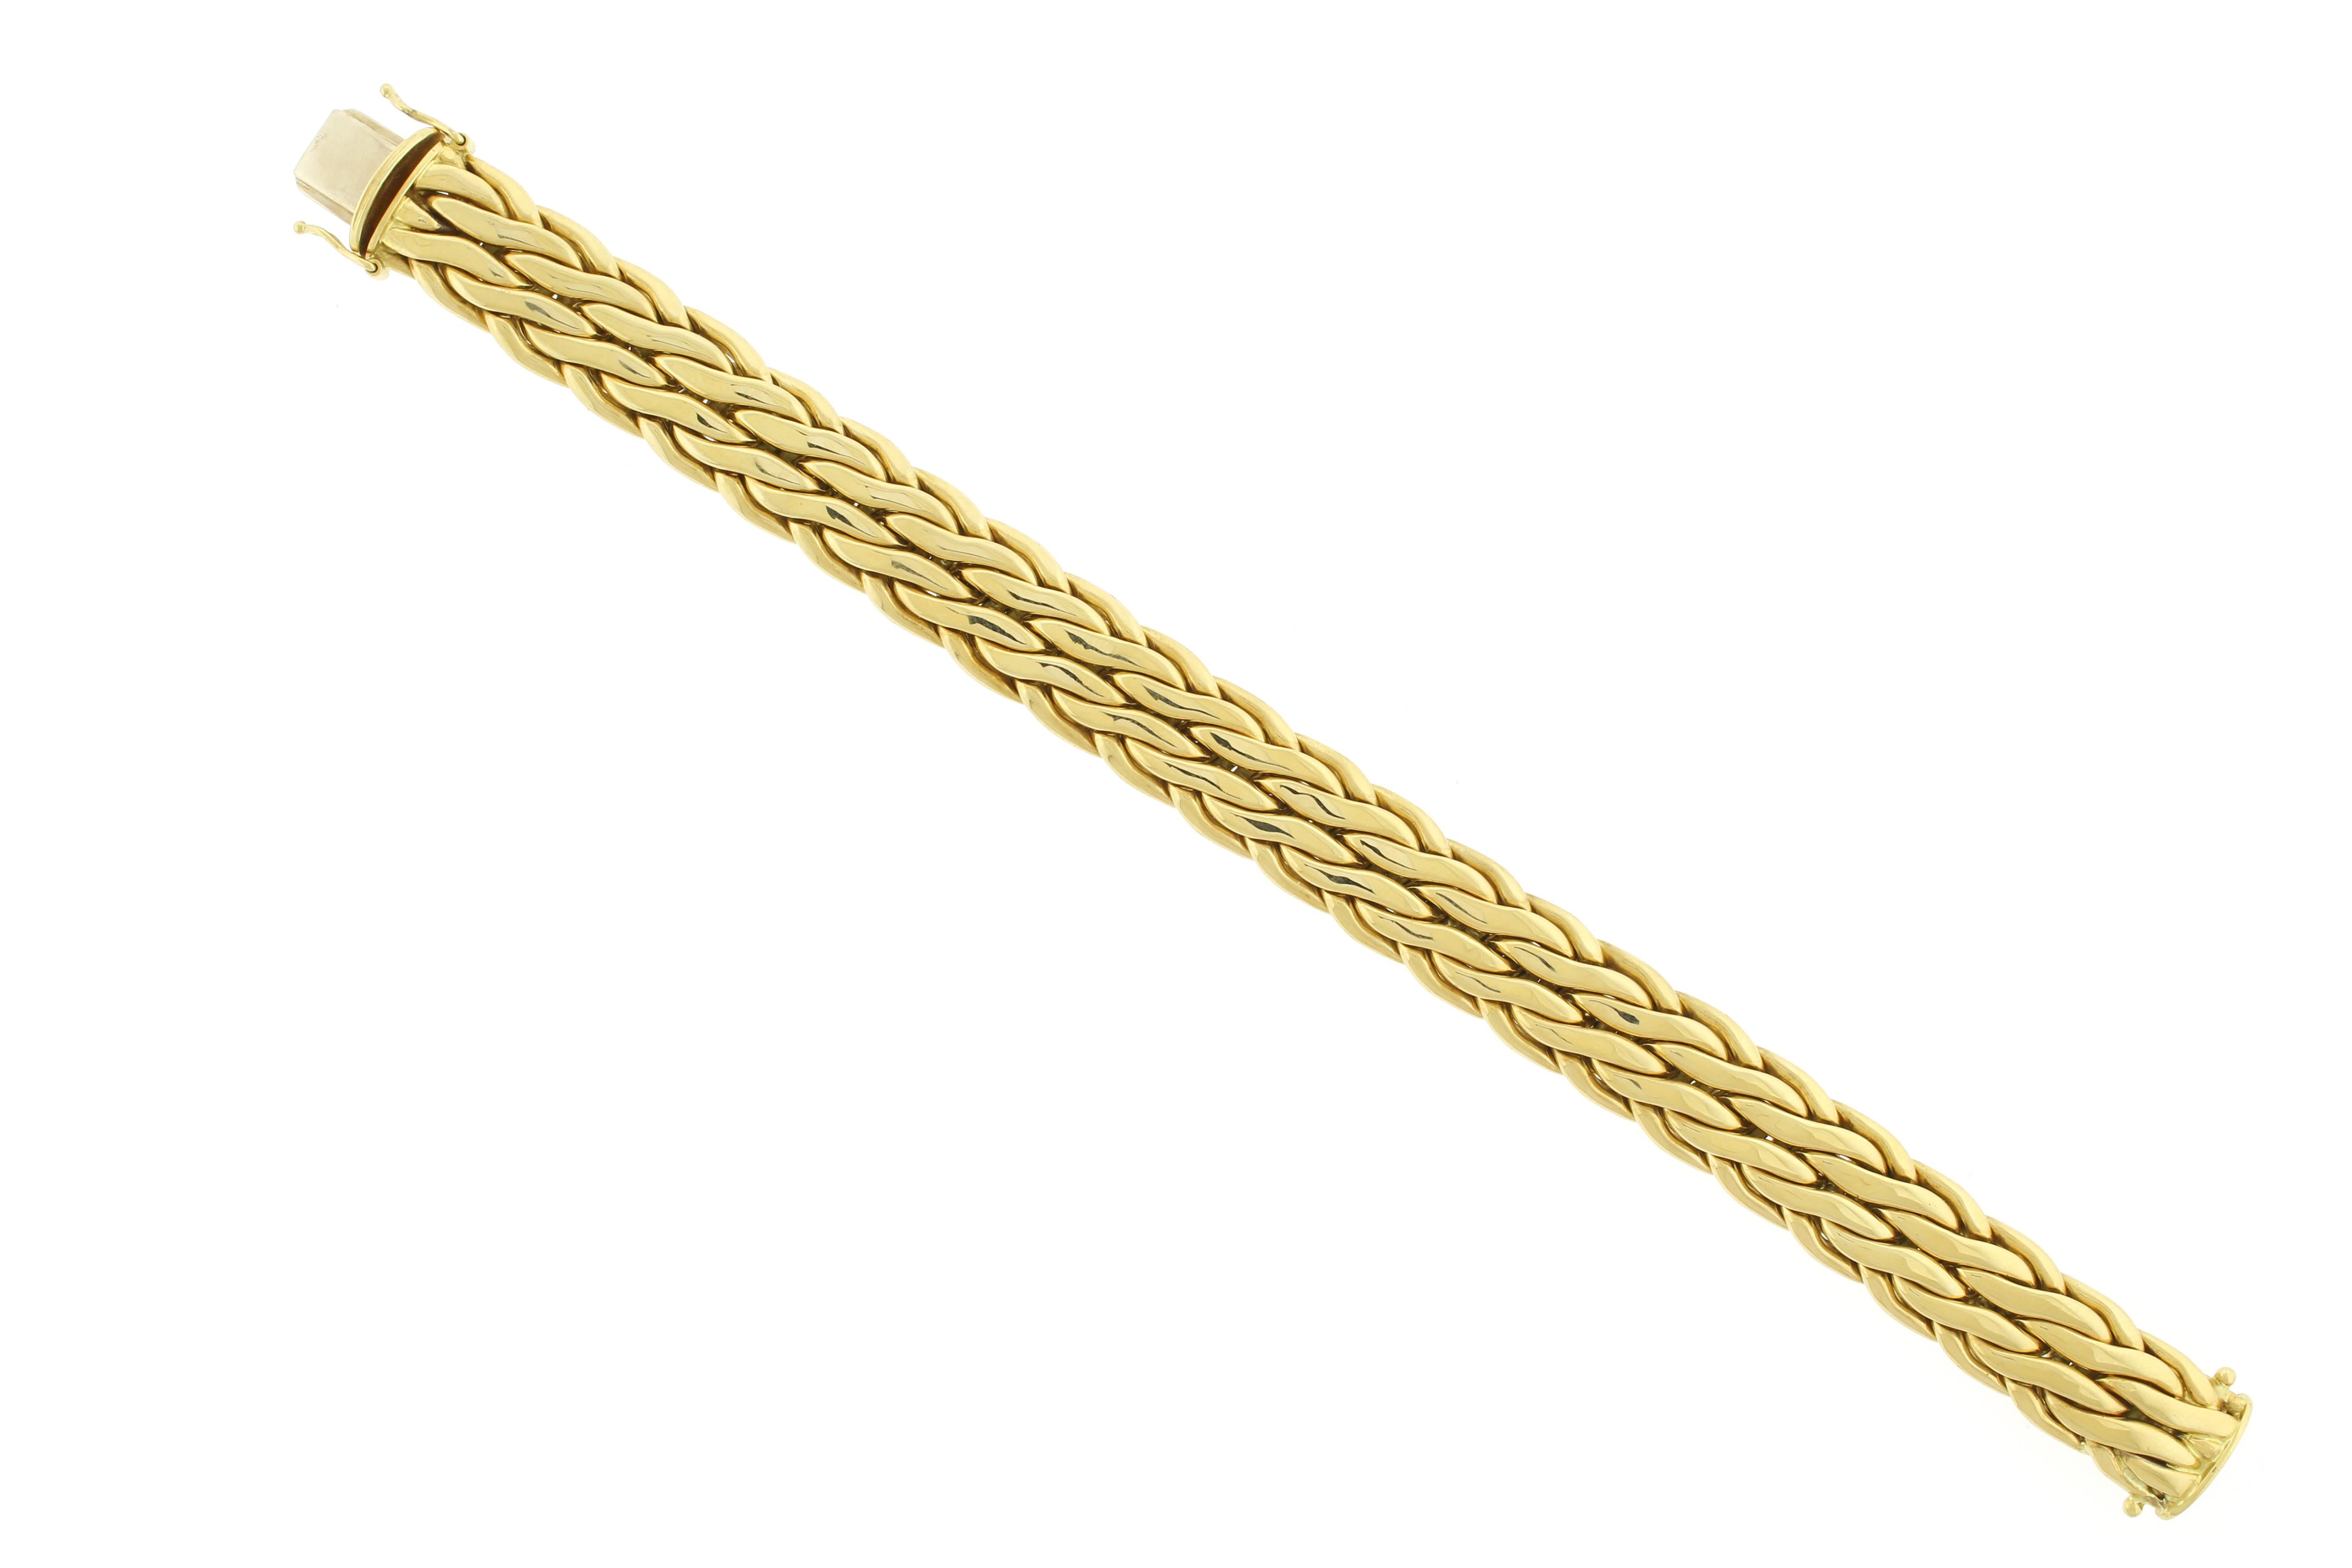 Abel & Zimmerman 18kt Gold Woven Bracelet In Excellent Condition For Sale In Bethesda, MD